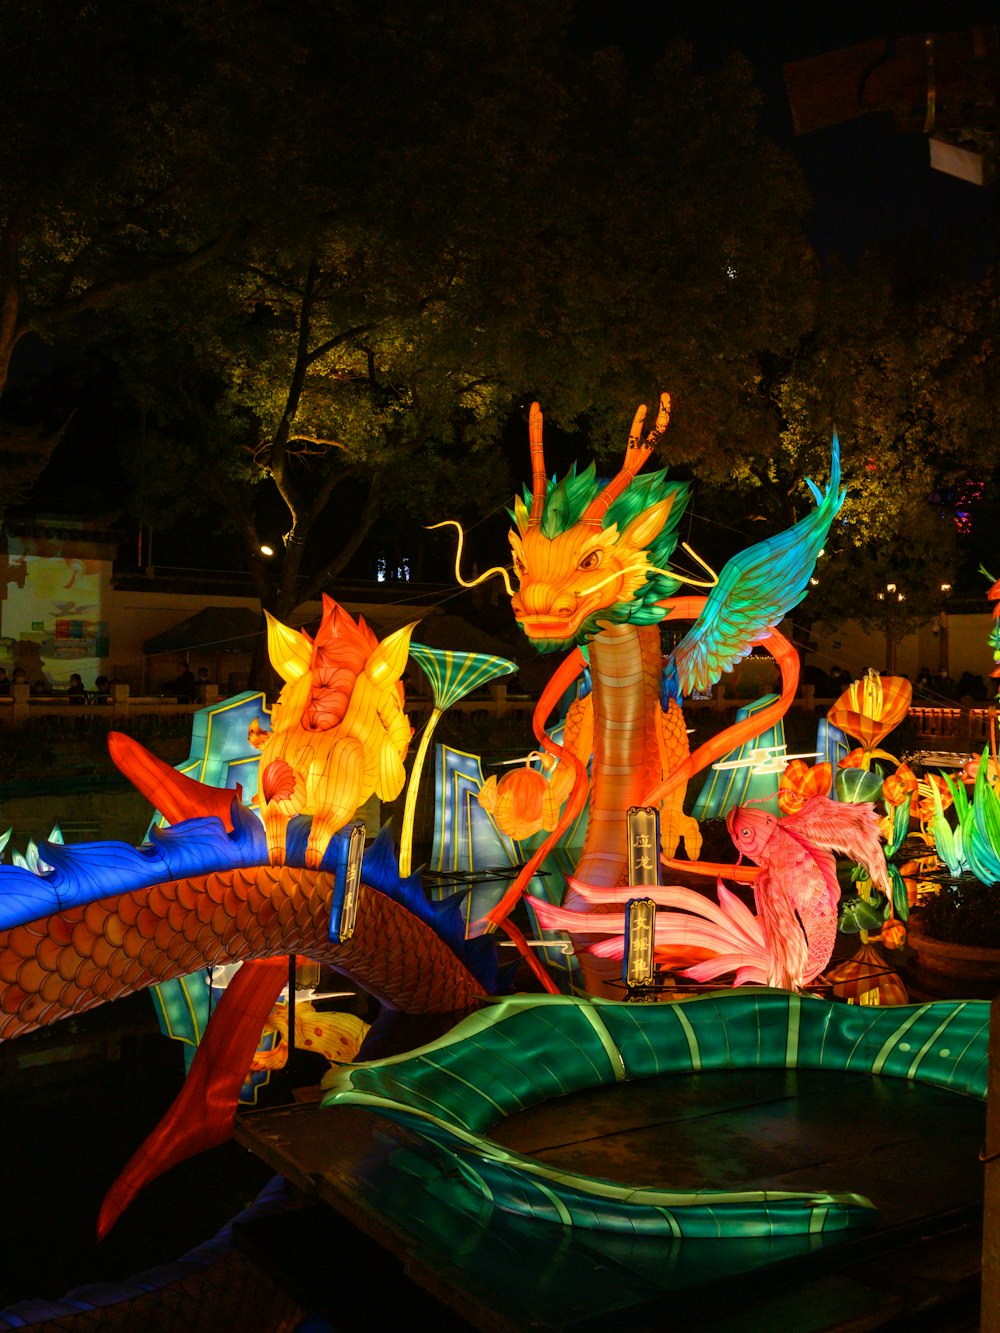 a display of colorful glass sculptures in a park